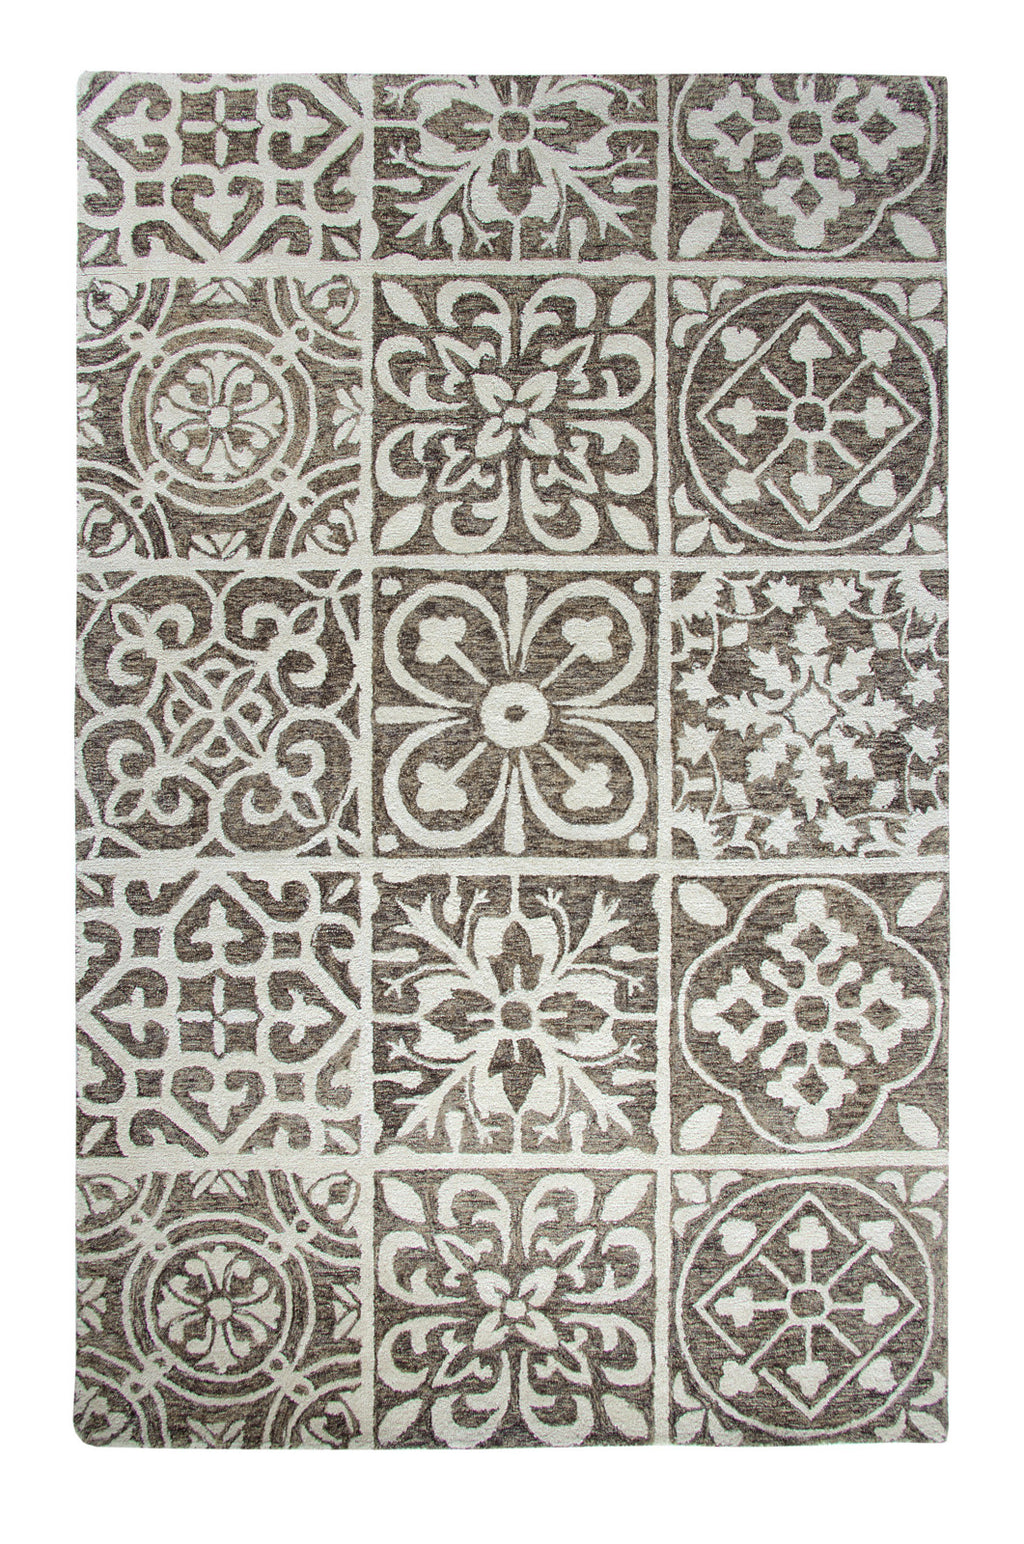 Dynamic Rugs Casual 92334 Silver/Charcoal Area Rug main image